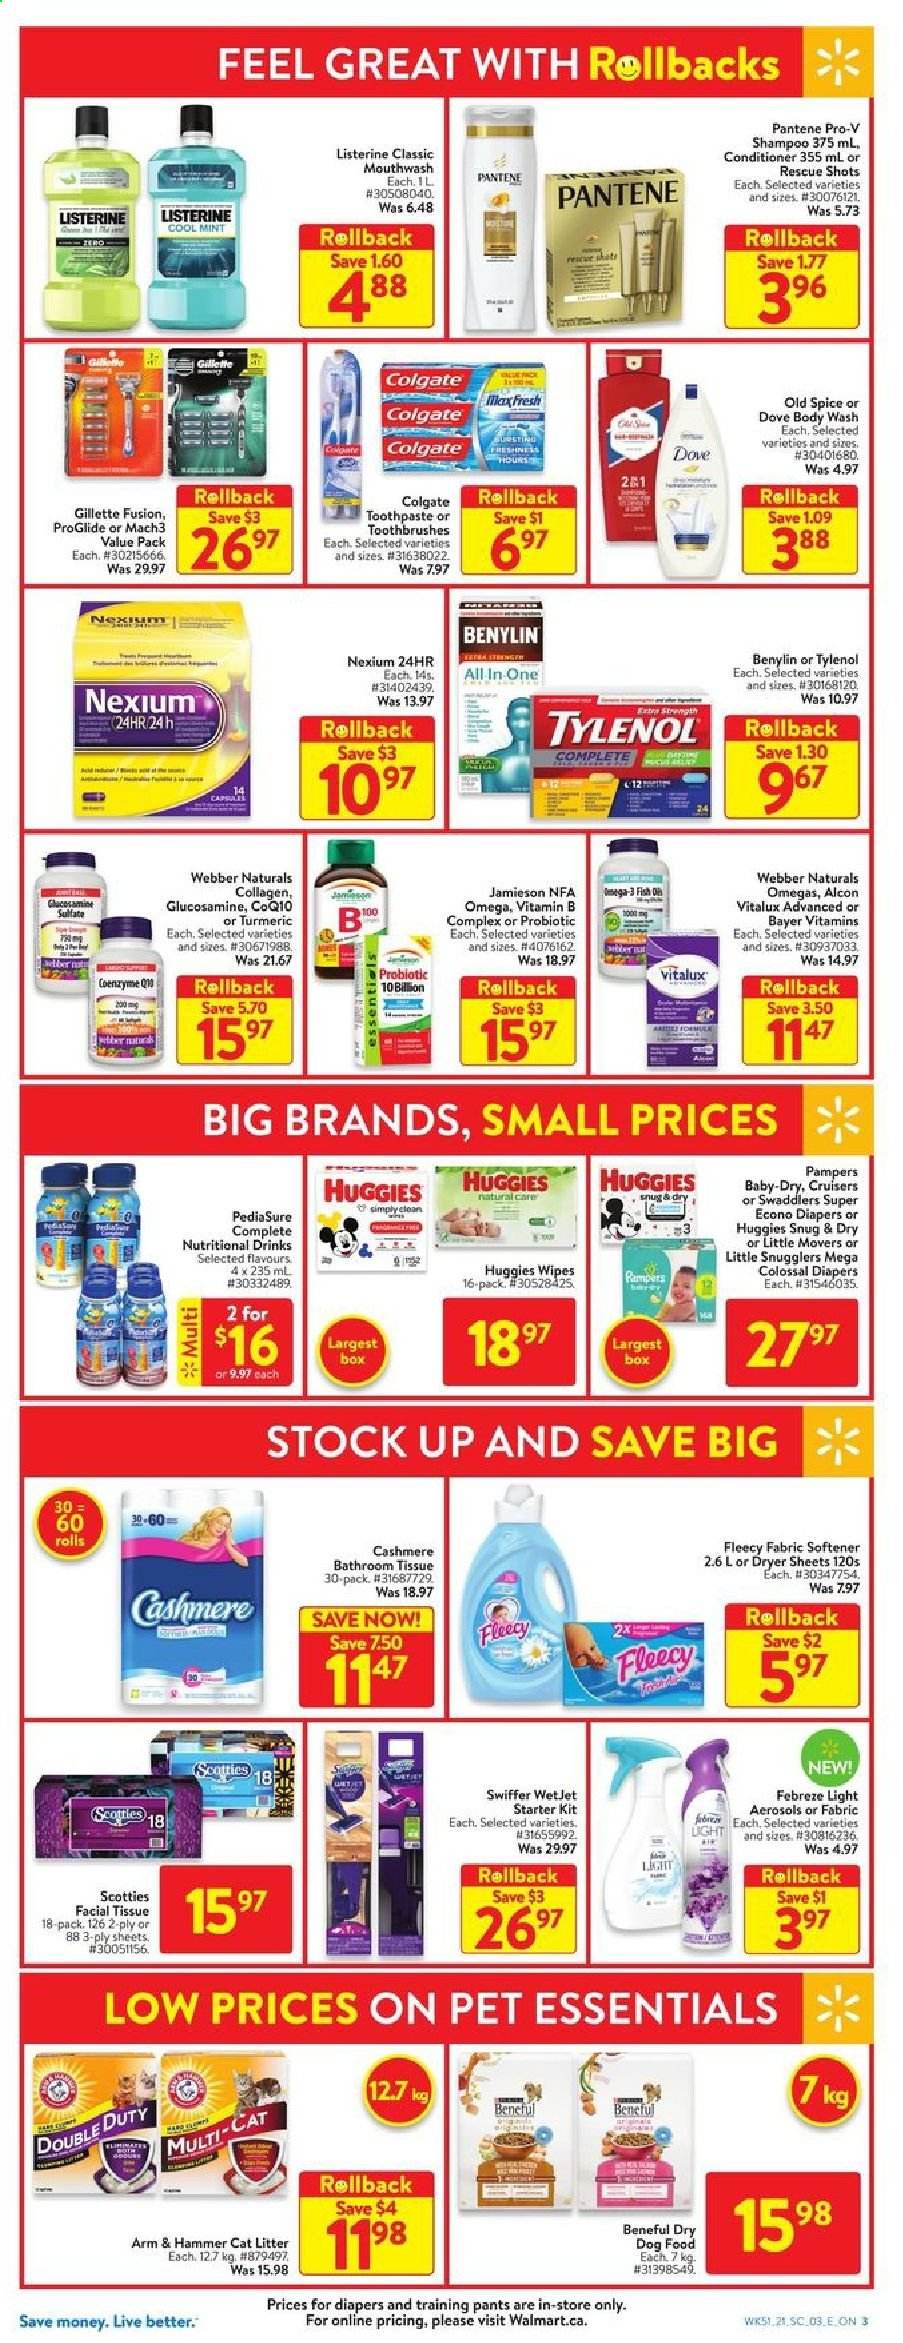 thumbnail - Walmart Flyer - January 14, 2021 - January 20, 2021 - Sales products - fish, ARM & HAMMER, turmeric, spice, L'Or, wipes, pants, nappies, baby pants, bath tissue, Febreze, Swiffer, fabric softener, dryer sheets, body wash, toothpaste, mouthwash, conditioner, WetJet, cat litter, animal food, dog food, dry dog food, Snug, glucosamine, Tylenol, Nexium, Bayer, Benylin, Gillette, Listerine, shampoo, Huggies, Pampers, Pantene, Old Spice. Page 10.